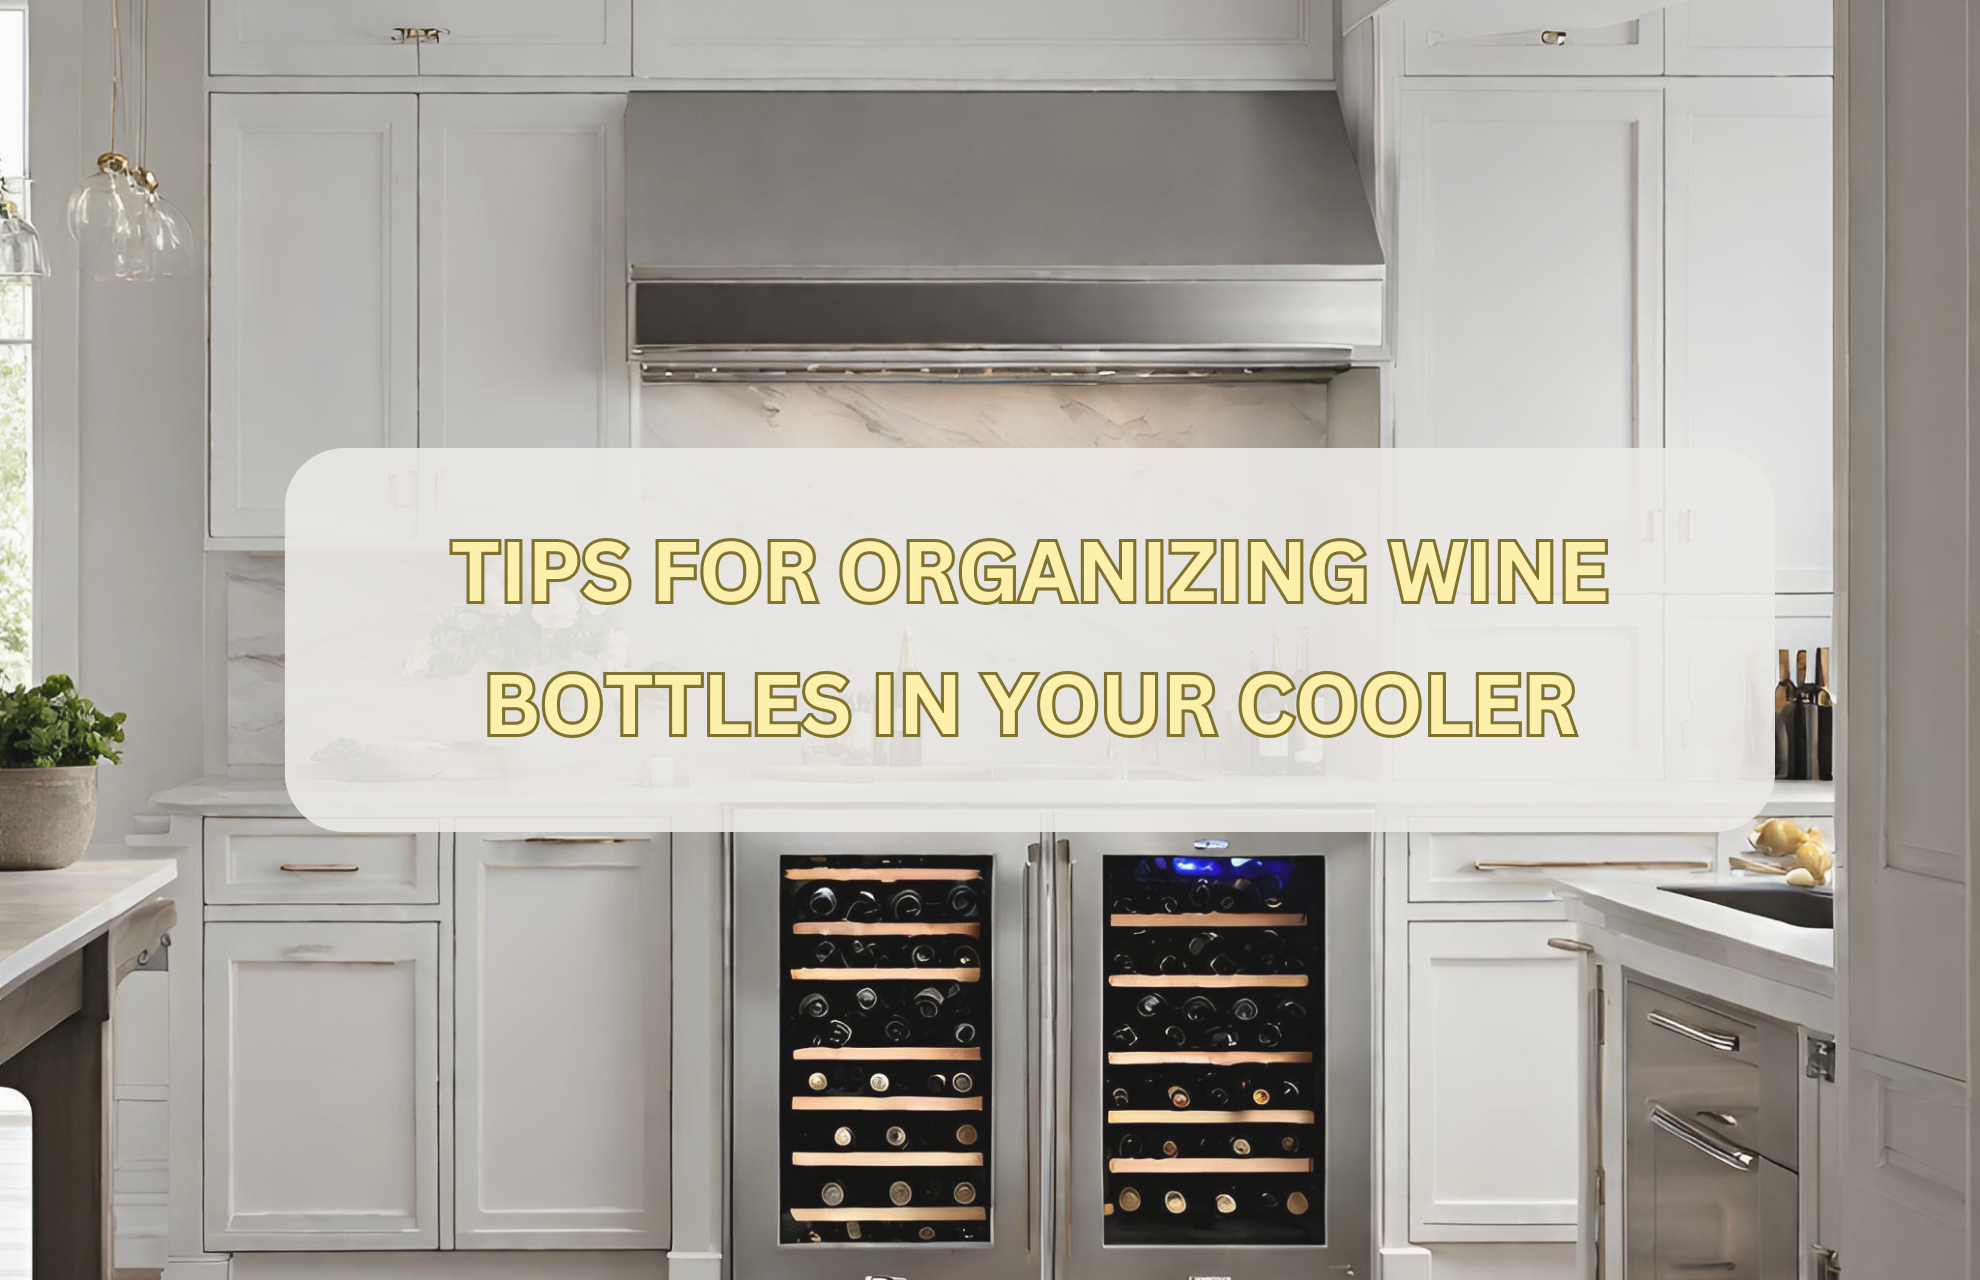 TIPS FOR ORGANIZING WINE BOTTLES IN YOUR COOLER